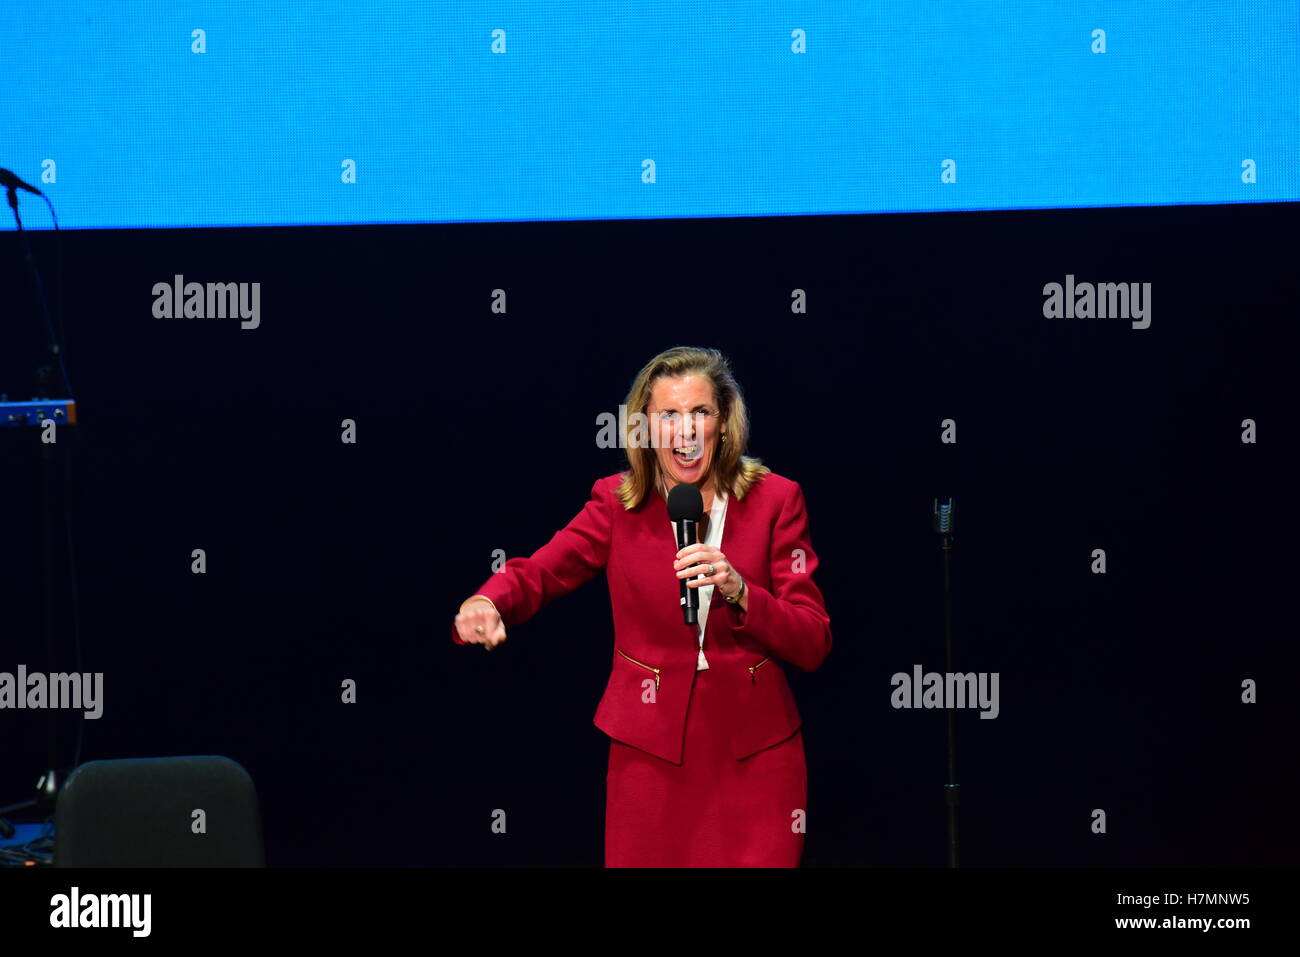 US senatorial candidate Katie McGinty speaks for Hillary. Hillary Clinton made a campaign stop in Philadelphia's Mann Center for the Performing Arts accompanied by pop star Katy Perry, who sang several of her classic stand-bys, including 'Roar!' which has been used by the Clinton campaign in their appeals. Prior to the candidate's appearance, the audience heard from Senator Corey Booker, US Representative Bob Brady, Senatorial candidate Katie McGinty and actress Debra Messing. TV producer Shonda Rimes introduced Mrs. Clinton to packed & enthusiastic crowd. (Photo by Andy Katz/Pacific Press) Stock Photo